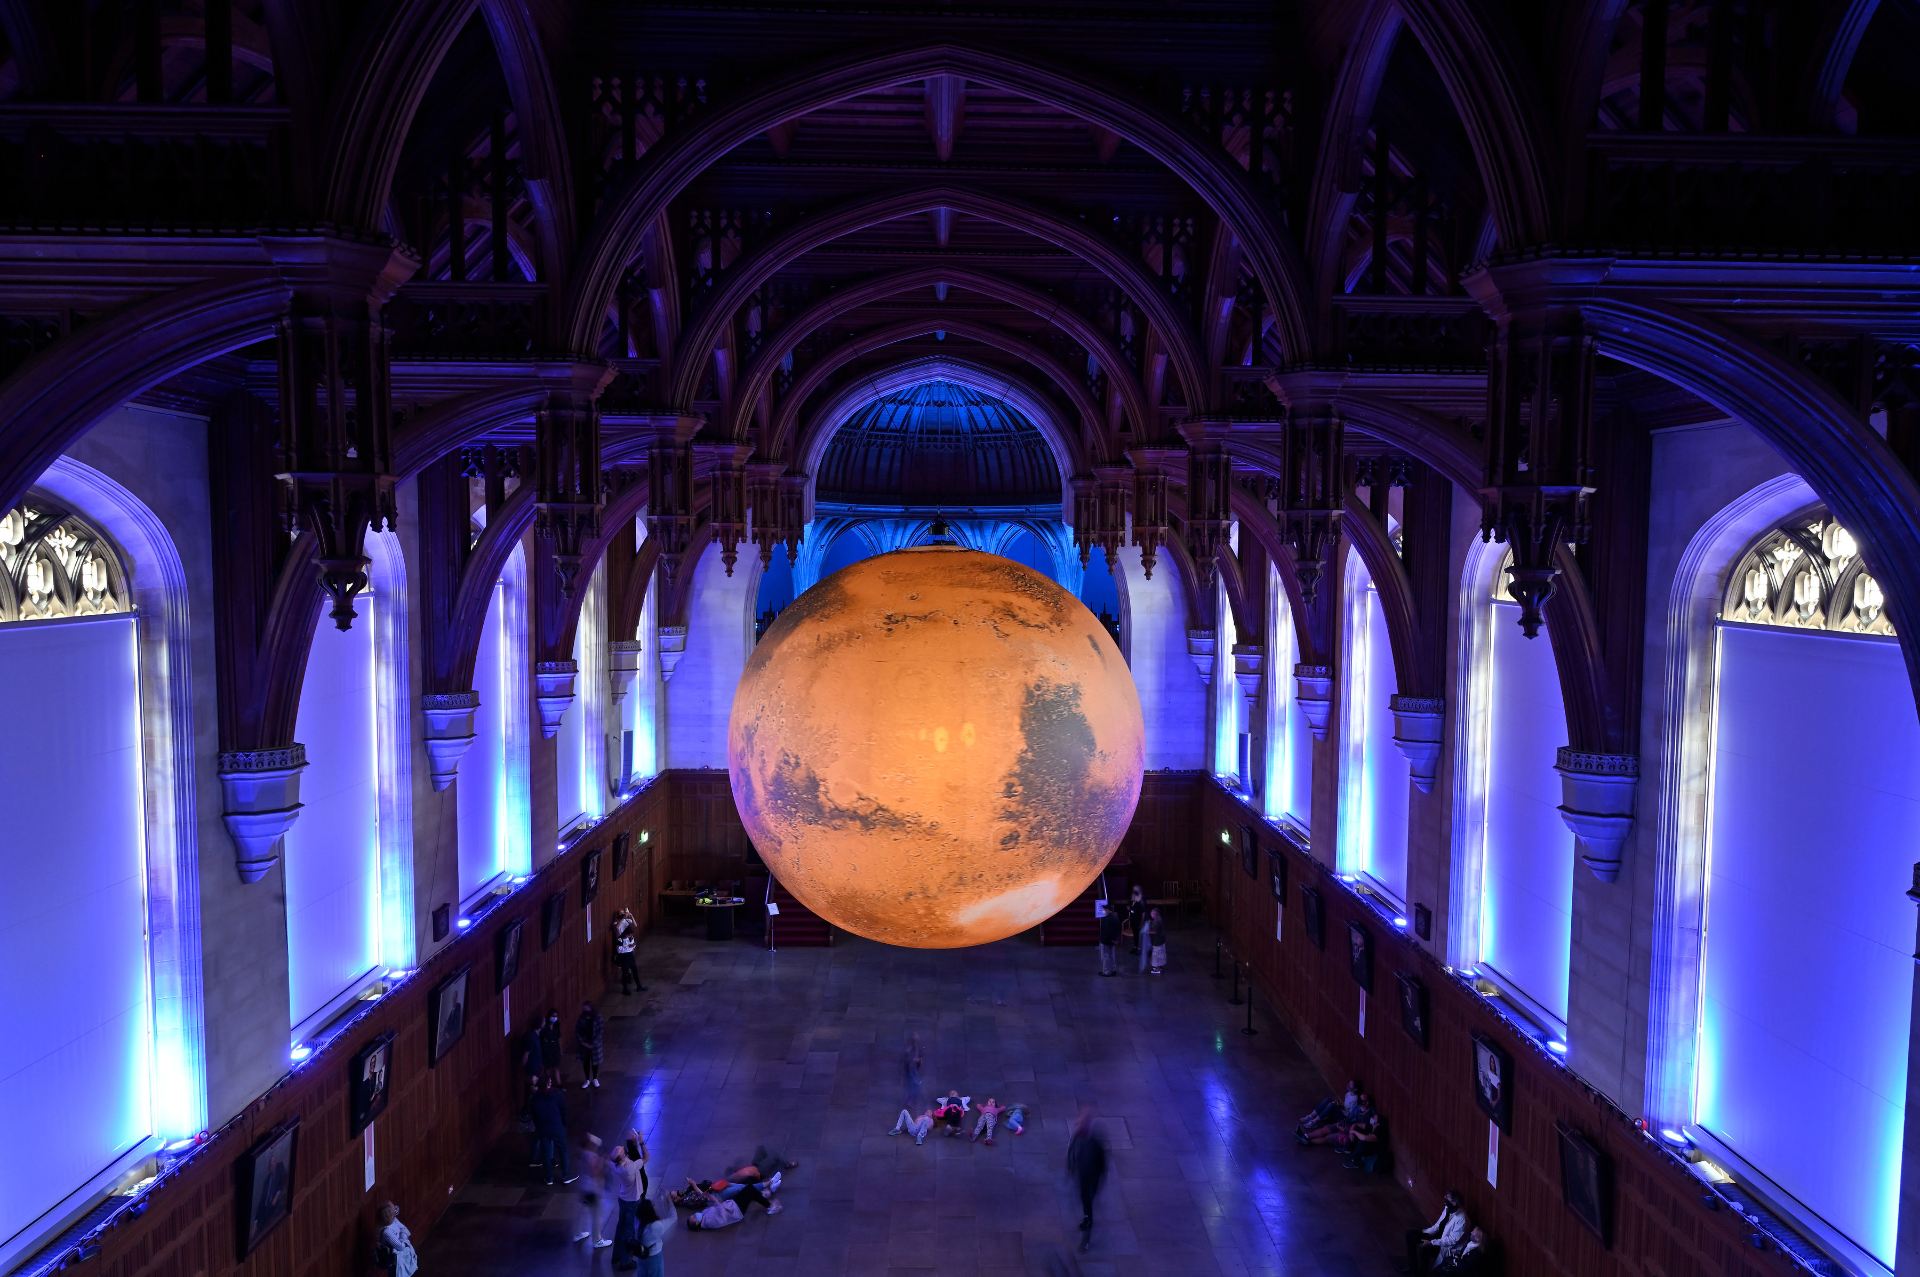 Visitor with pram and child passing underneath installation of Mars by Luke Jerram